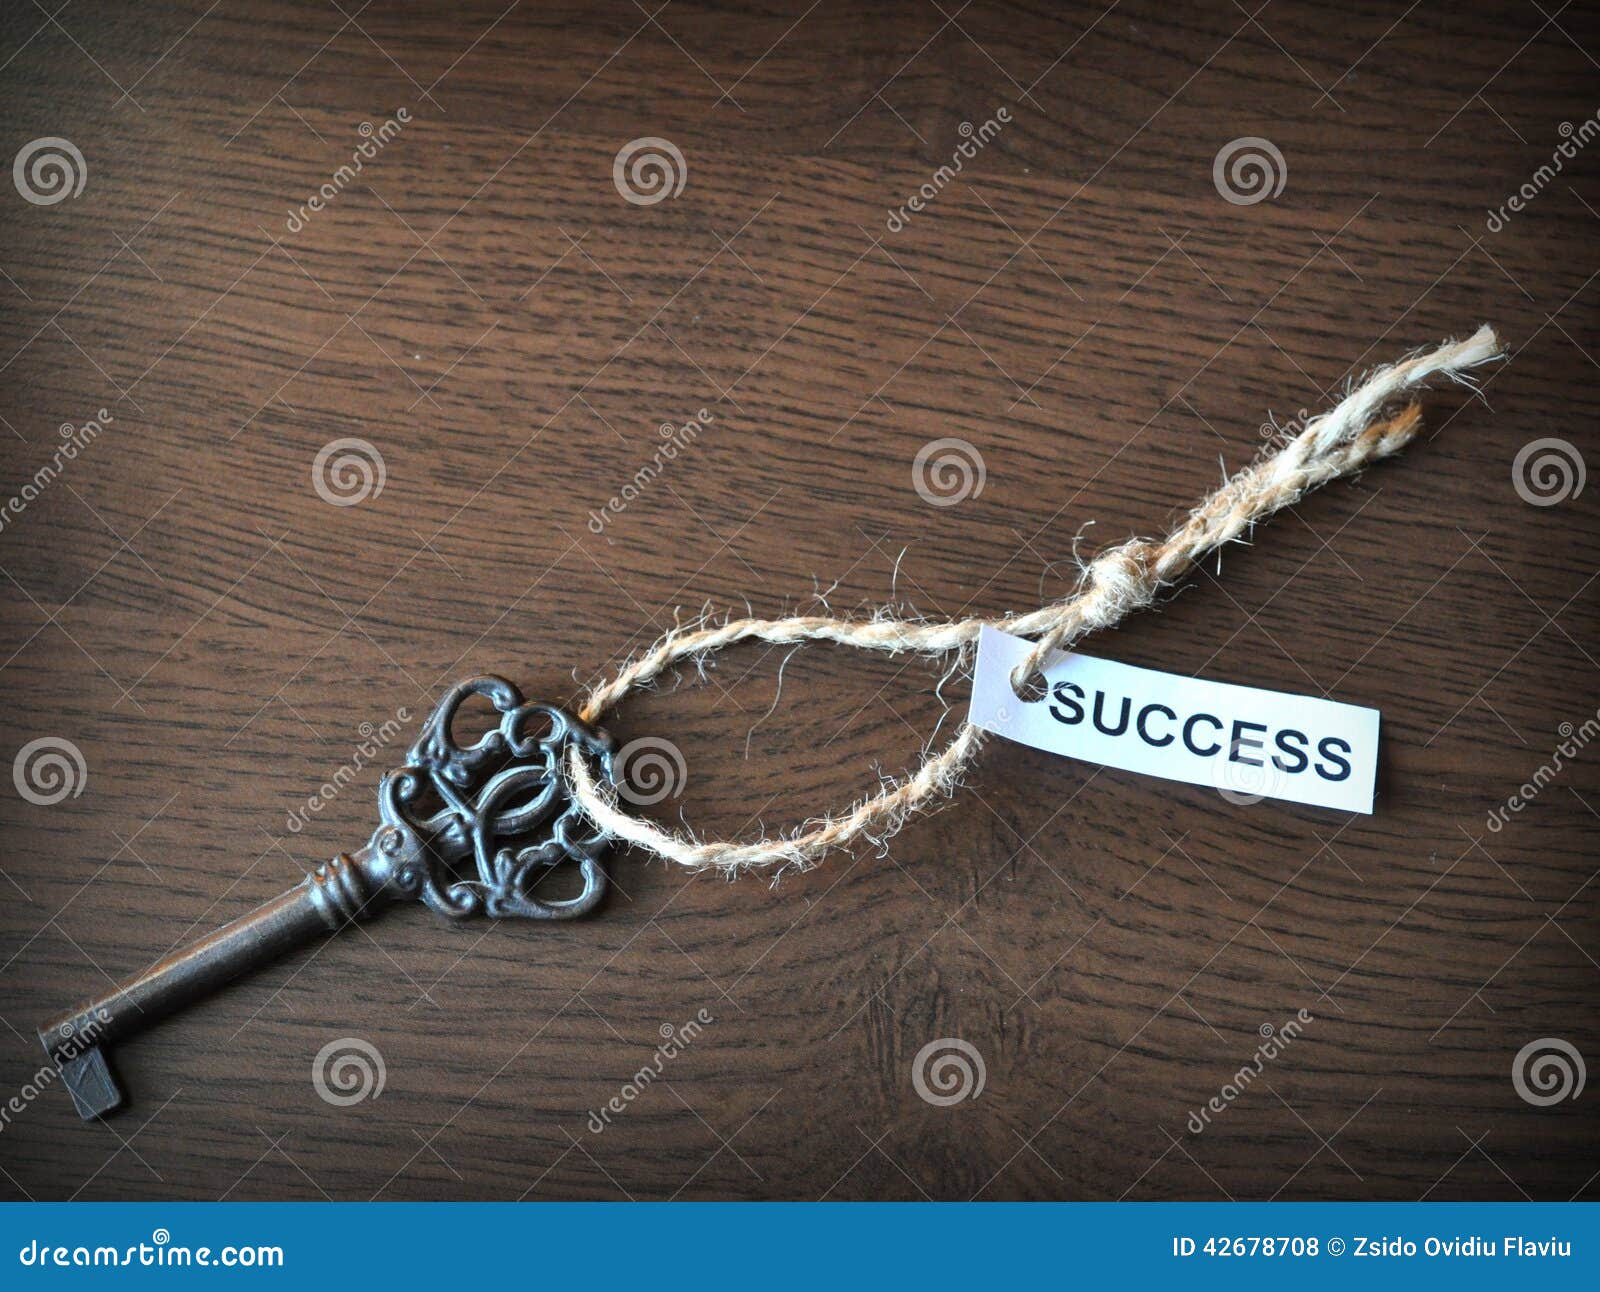 the key to succes